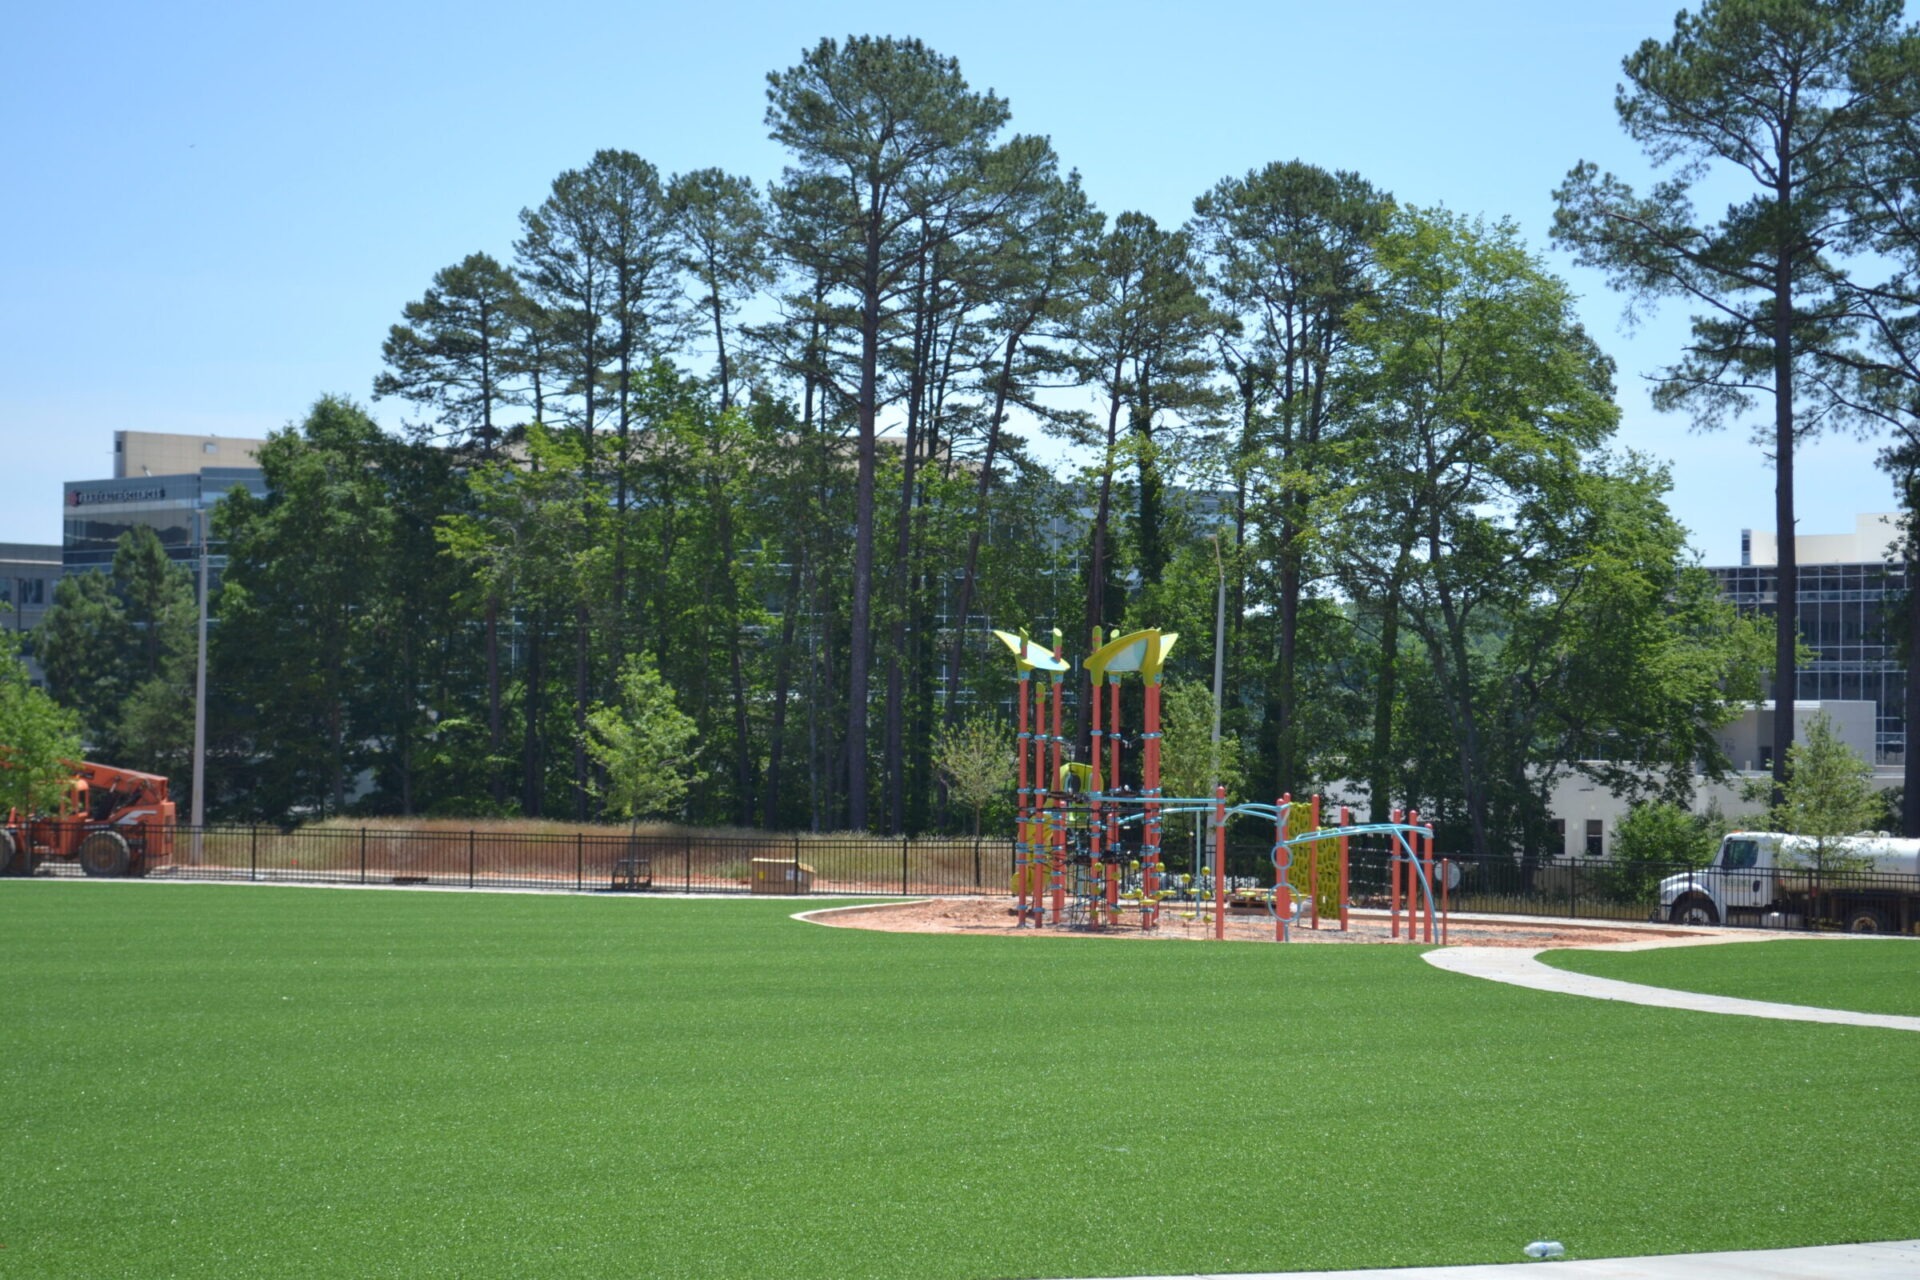 A vibrant playground with slides and climbing structures sits on artificial grass, surrounded by tall pine trees, under a clear blue sky.